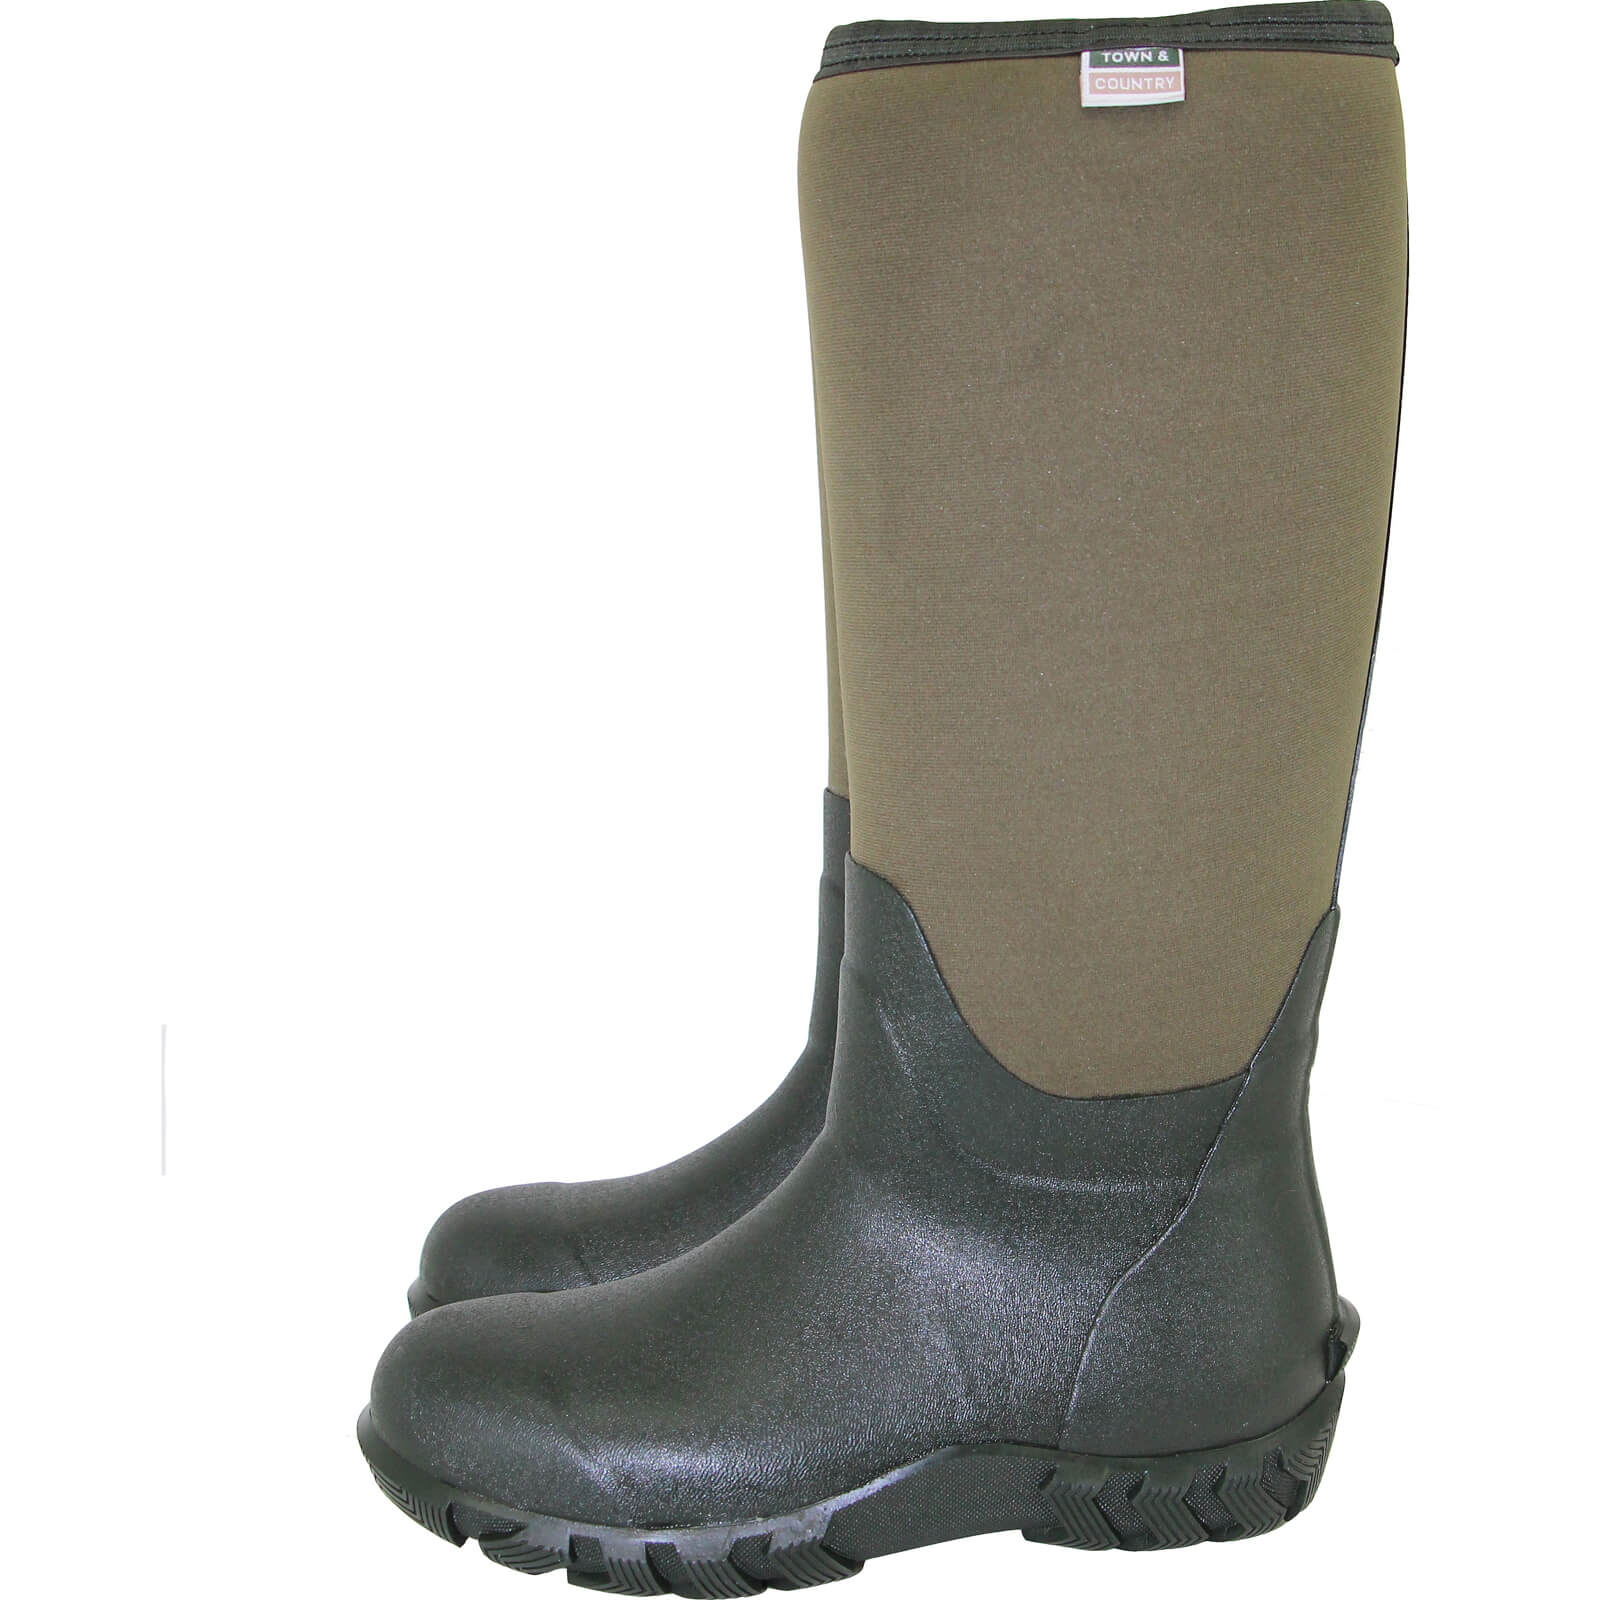 Image of Town and Country Buckingham Rubber Wellington Boots Green Size 9